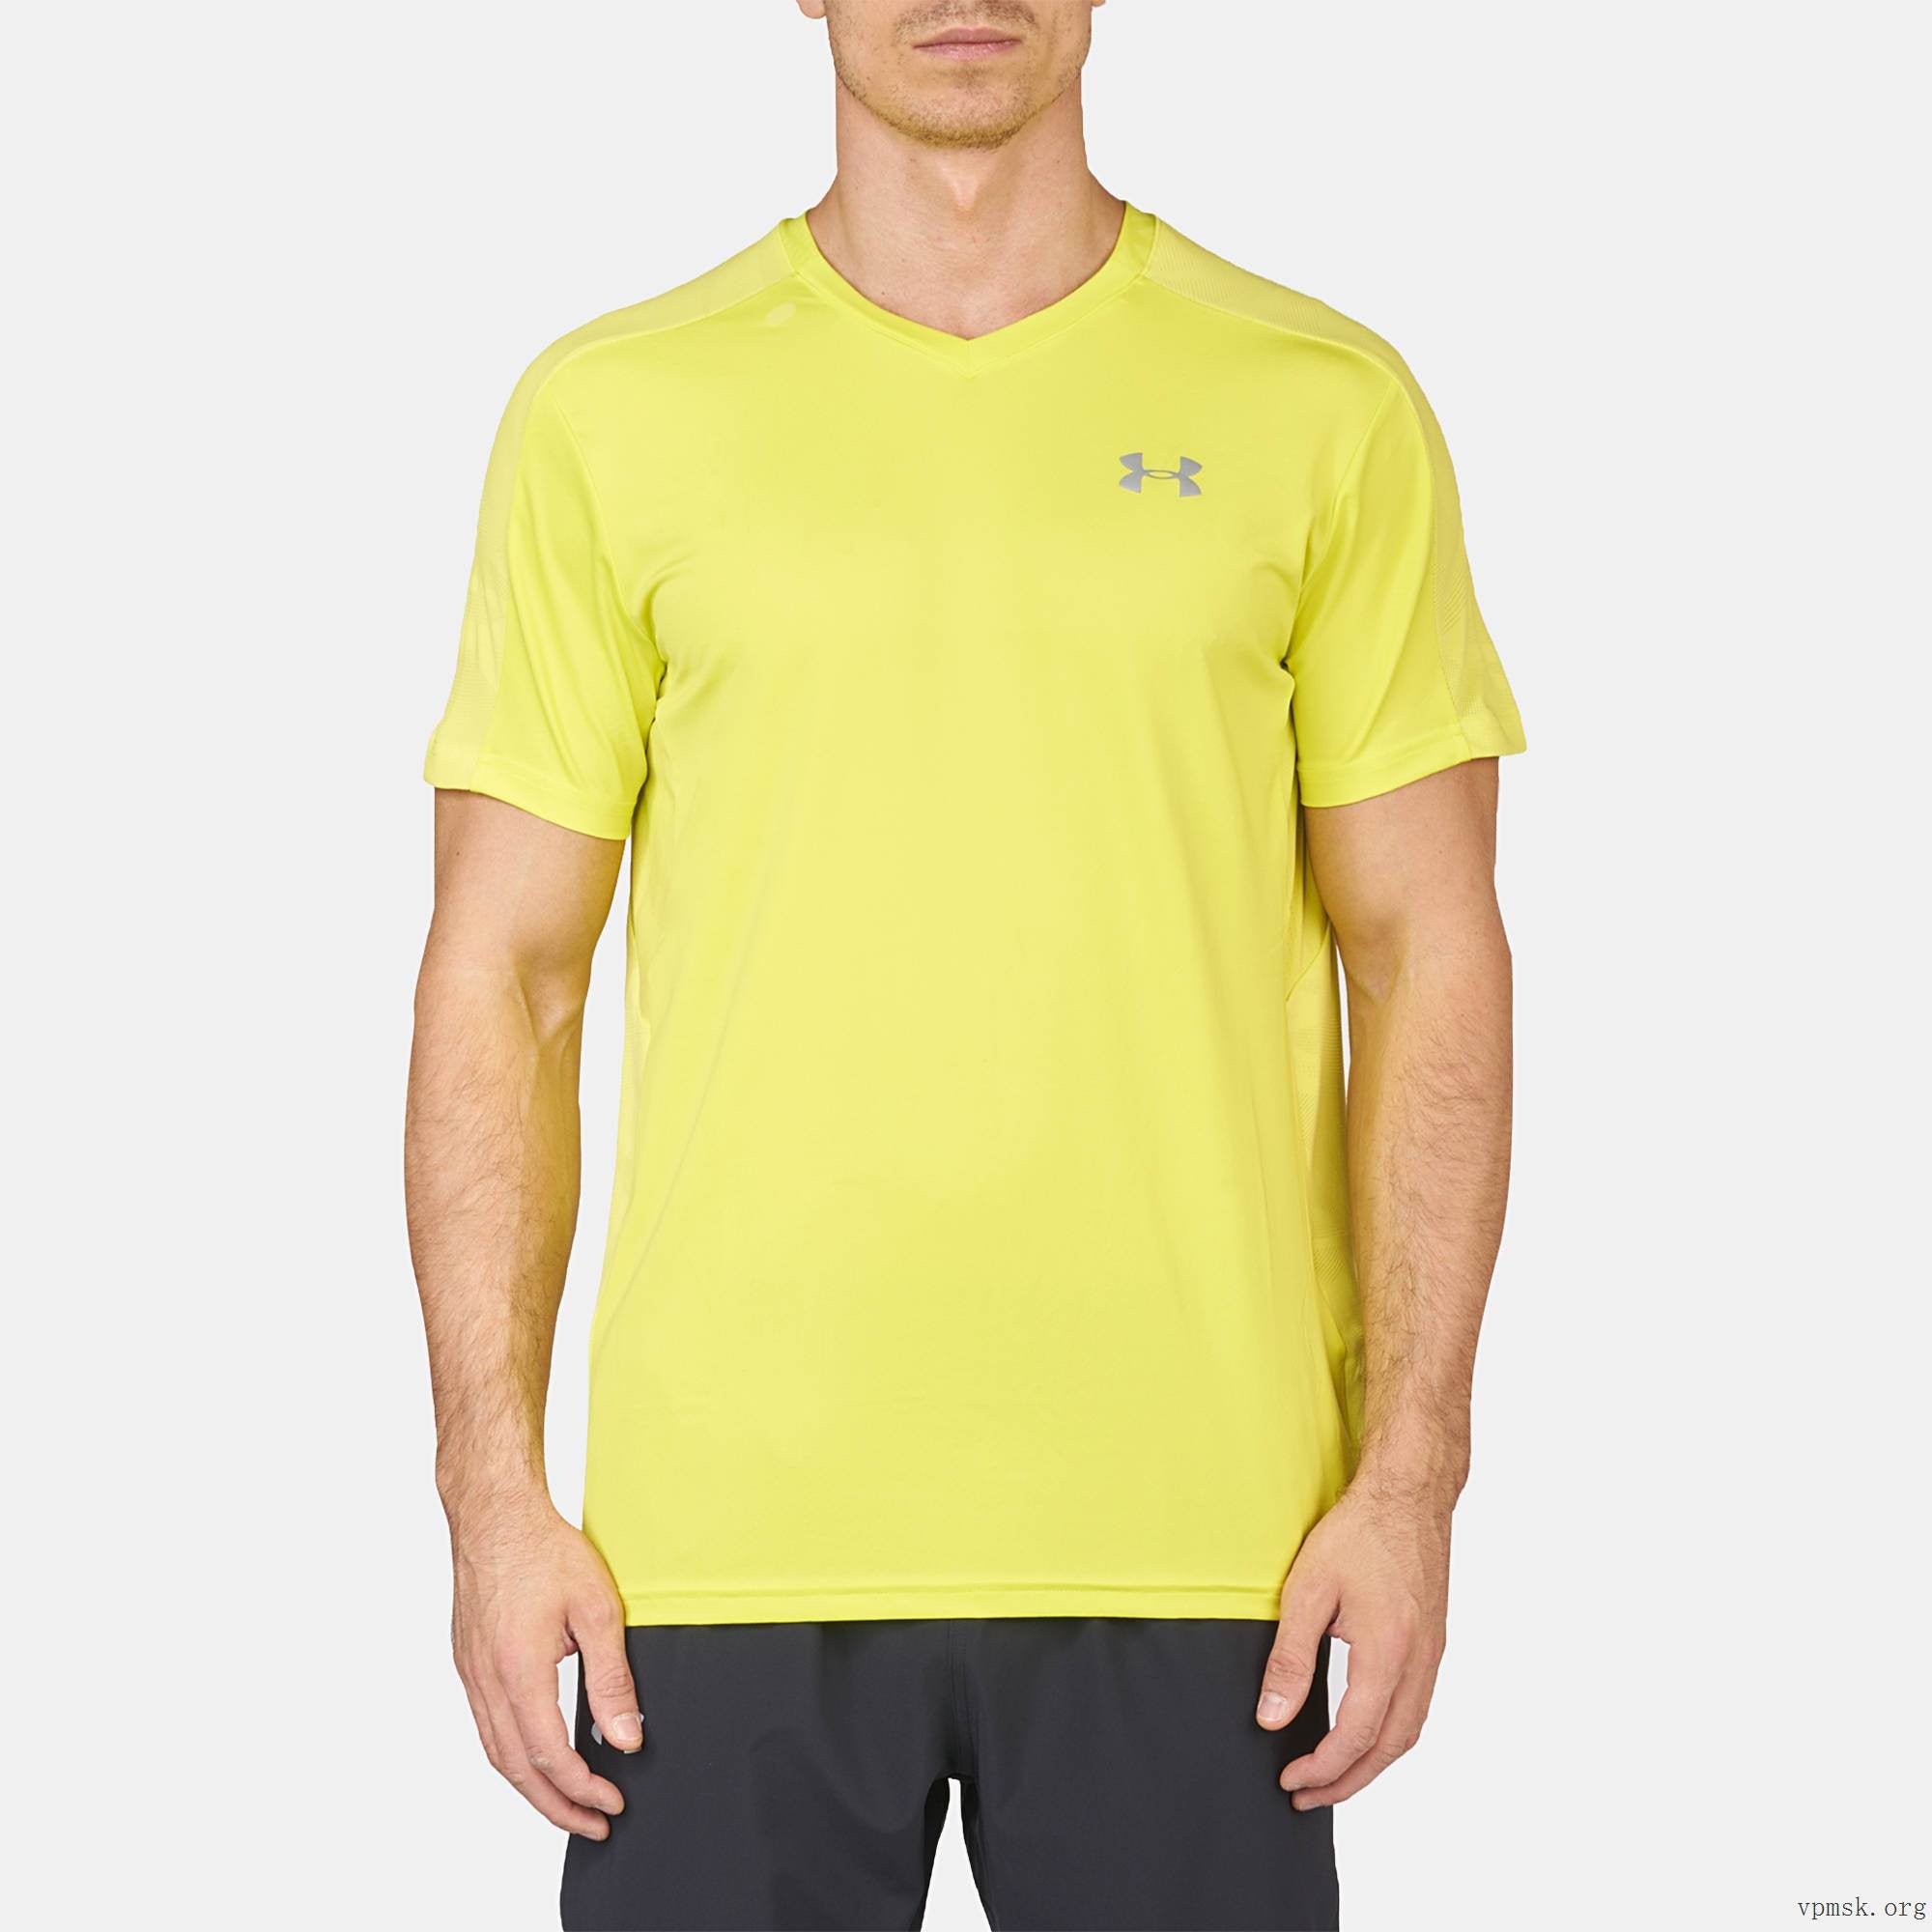 Under Armour CoolSwitch Run Short Sleeve Mens Top - Yellow 1284965-738 –  Mann Sports Outlet